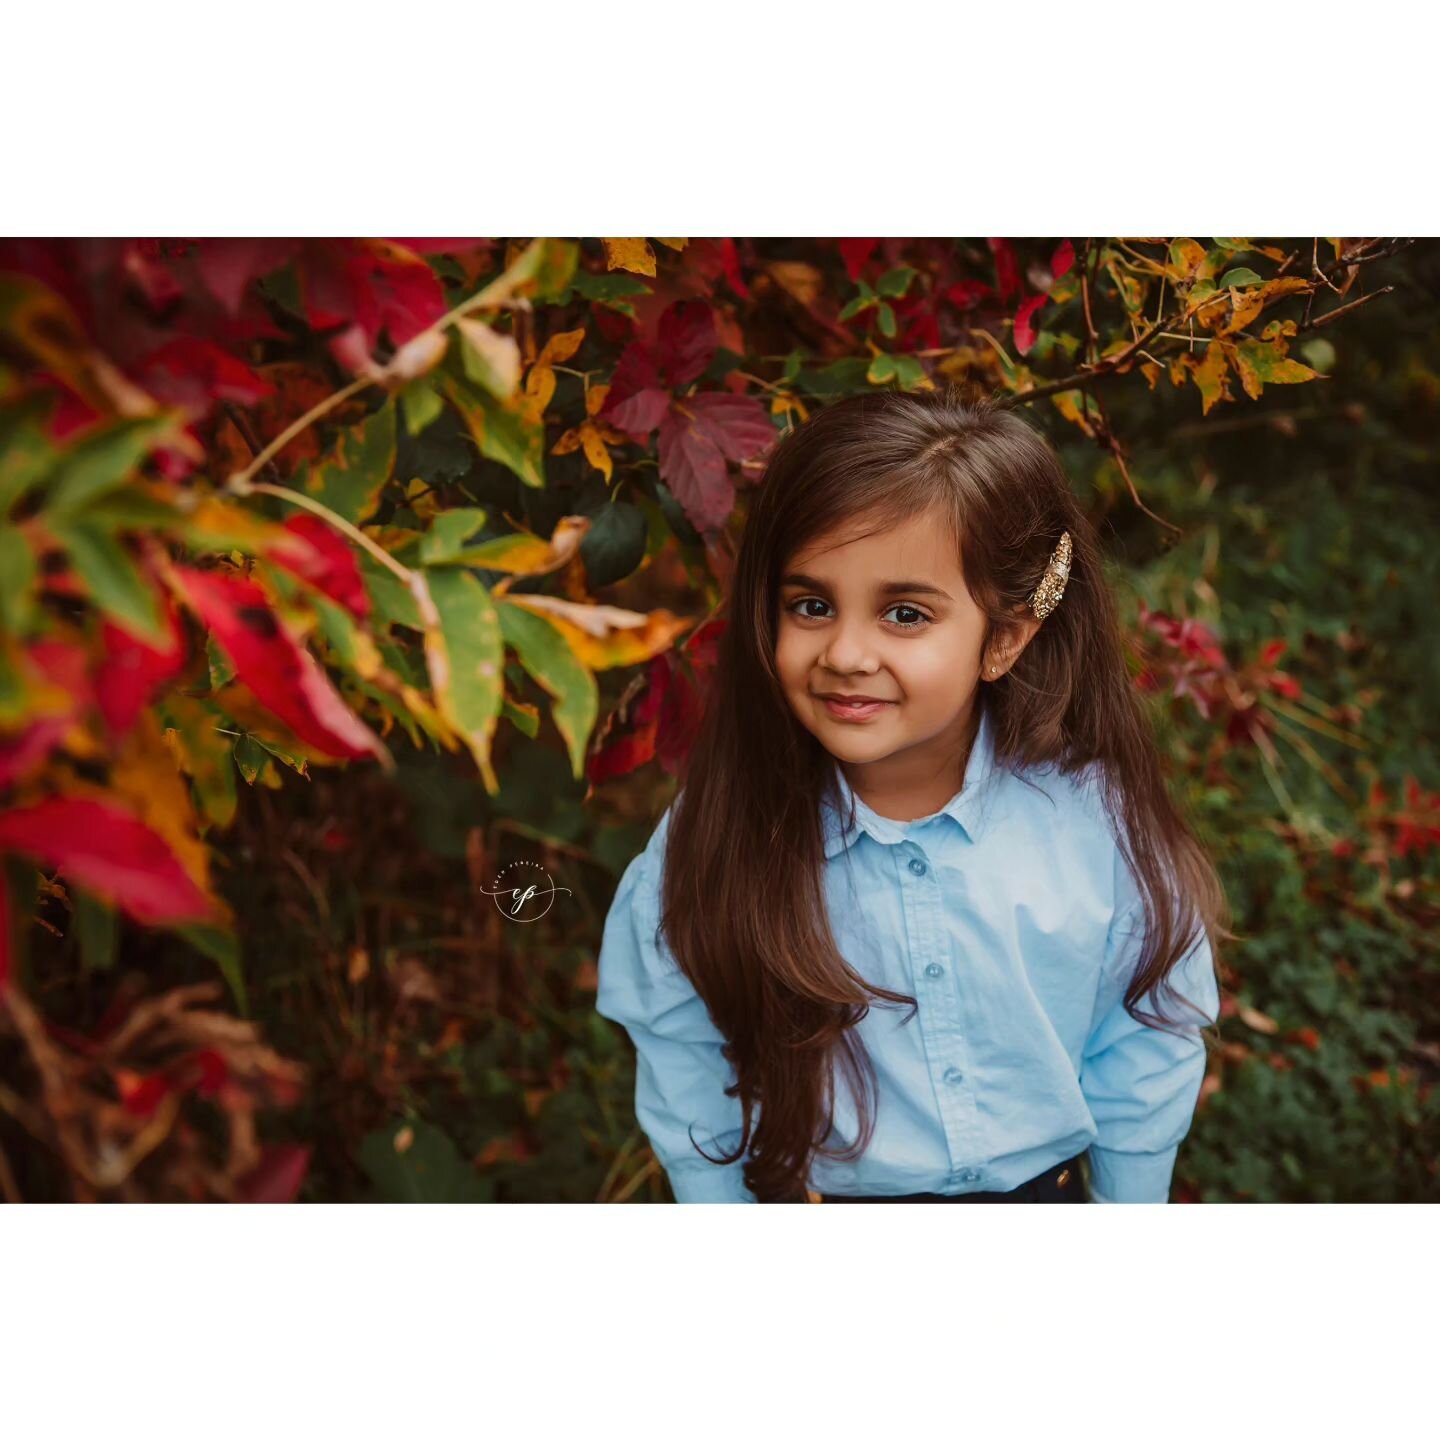 I've been photographing this little girl since before she was born in Mommy's tummy. She is growing into such a beautiful little lady. 
 🍂 🍁 
These are some fall memories from 2 years ago. We capture some special little moments with her Mom and Dad